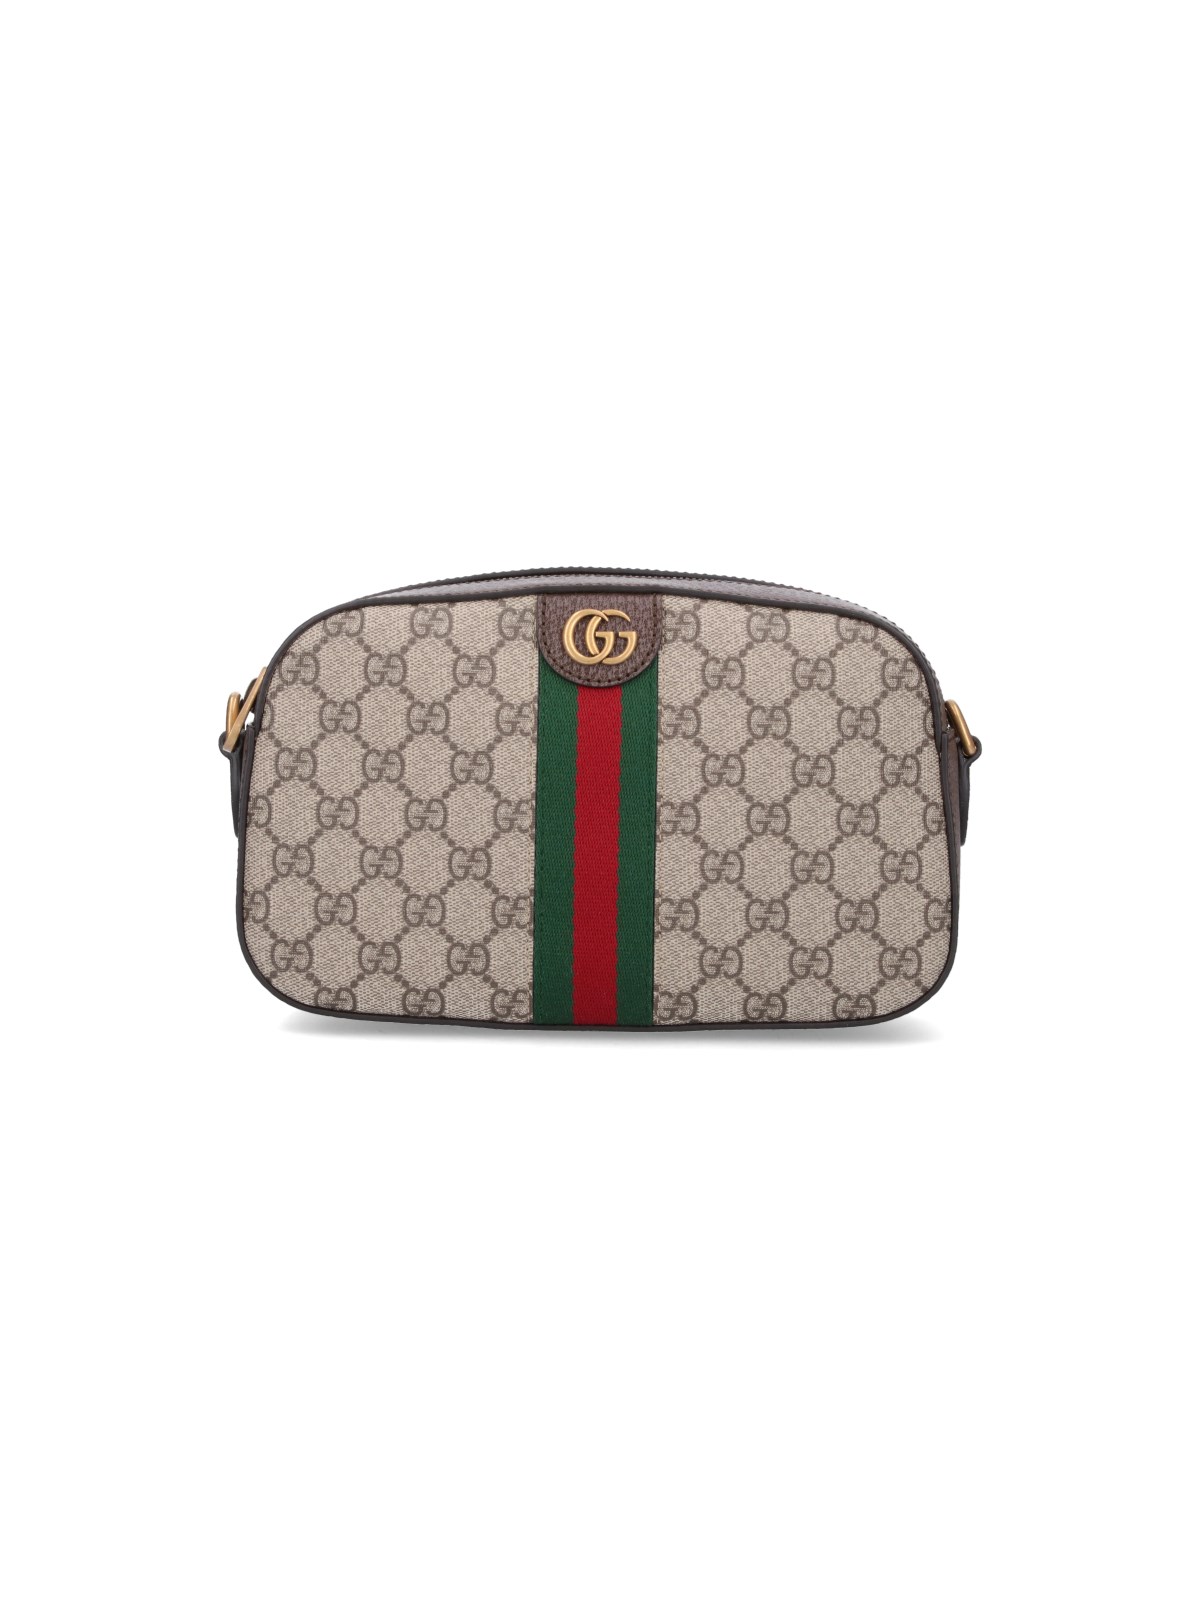 Gucci "ophidia Gg" Small Crossbody Bag In Brown